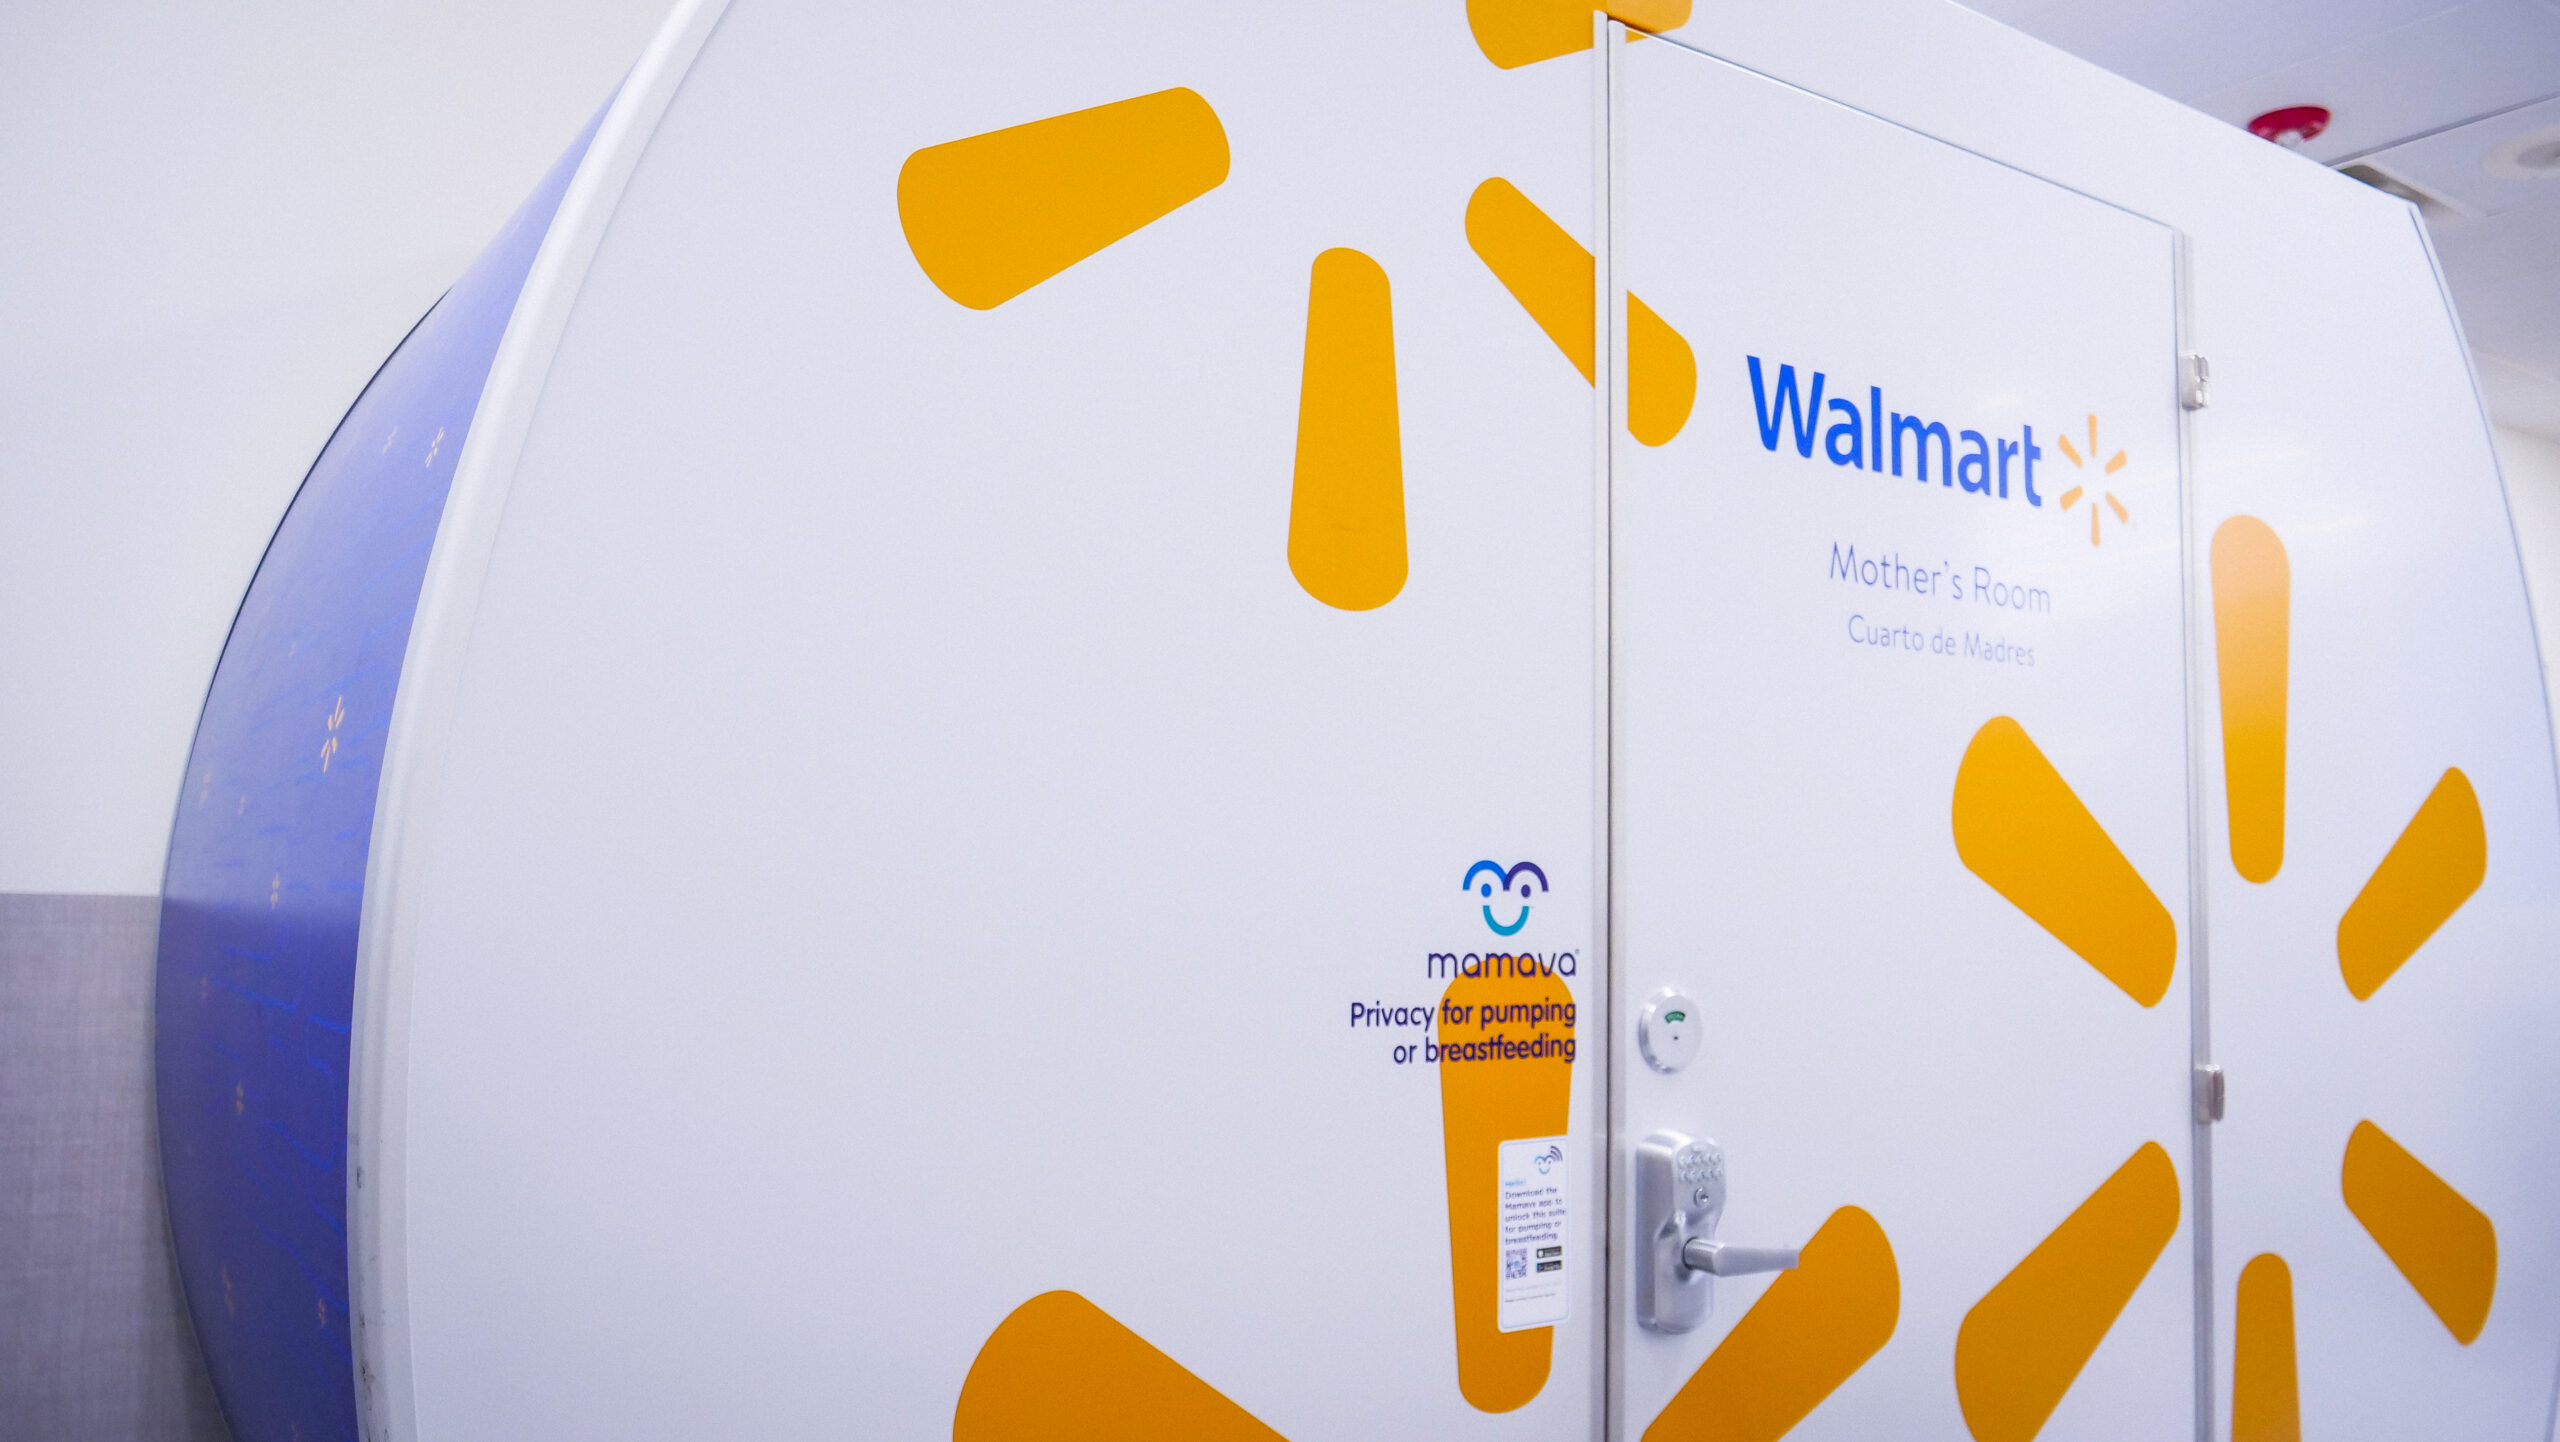 Walmart Is Adding Breastfeeding Pods In Stores So Mothers Can Pump or Nurse In Privacy